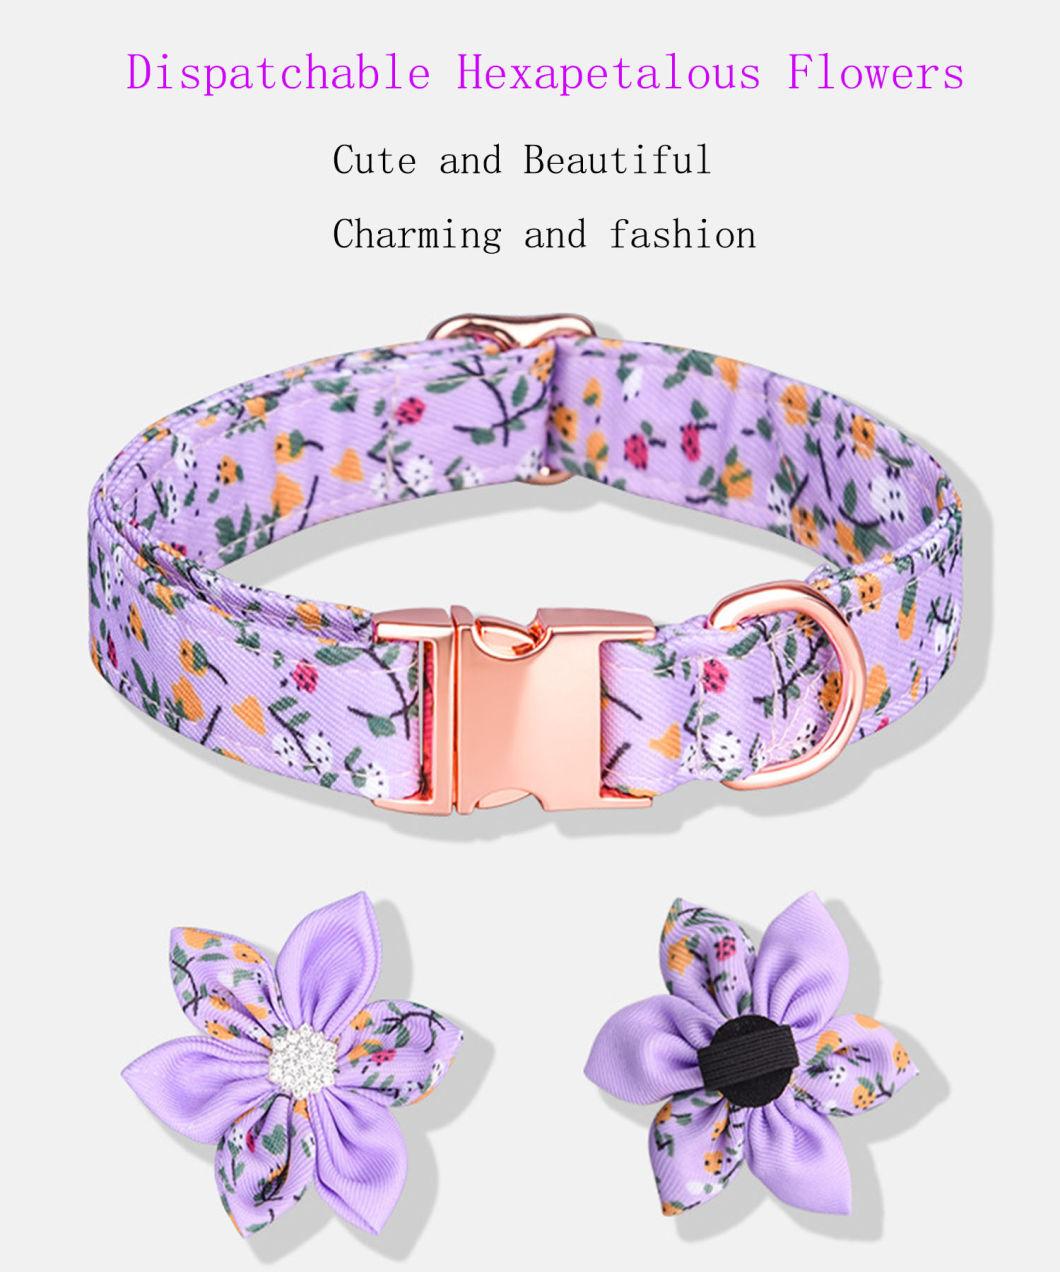 Charming Fashionable Pet Collar with Rhinestone and Dispatchable Flowers